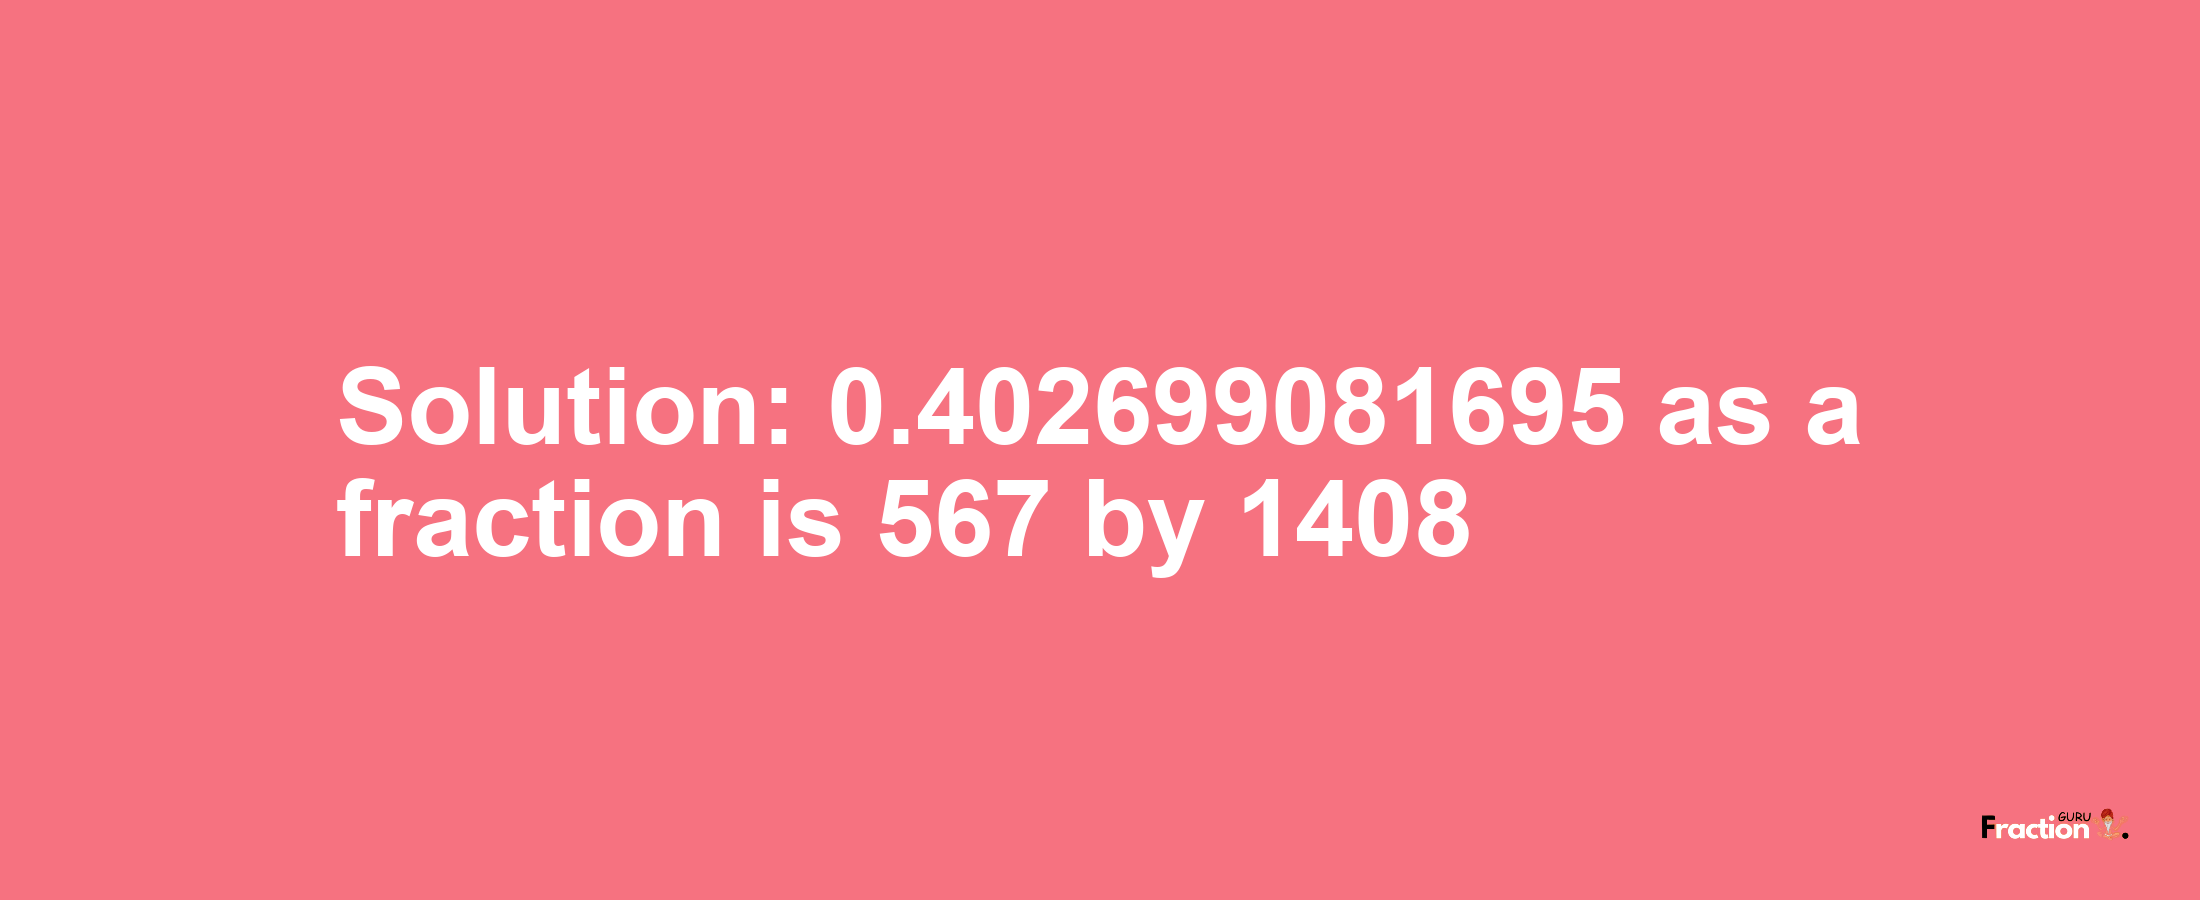 Solution:0.402699081695 as a fraction is 567/1408